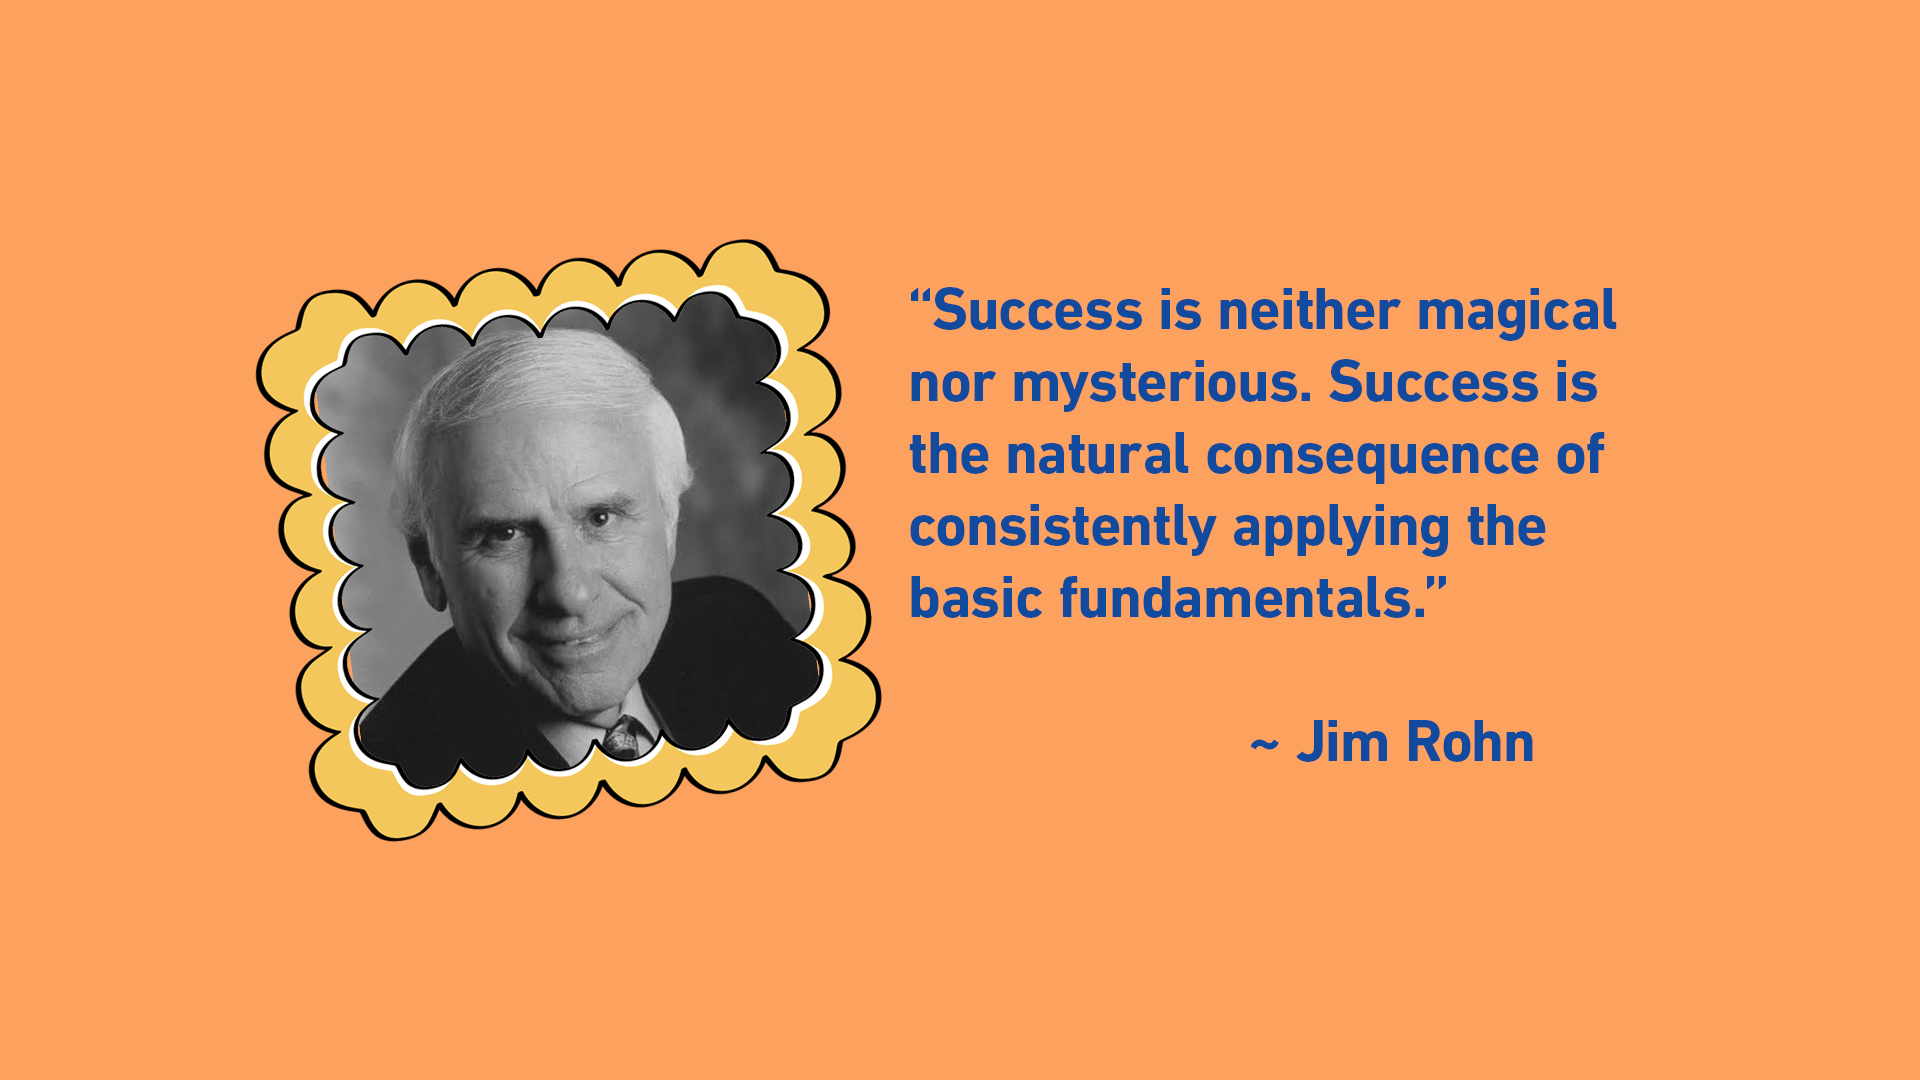 Success is the natural consequence of consistently applying the basic fundamentals.